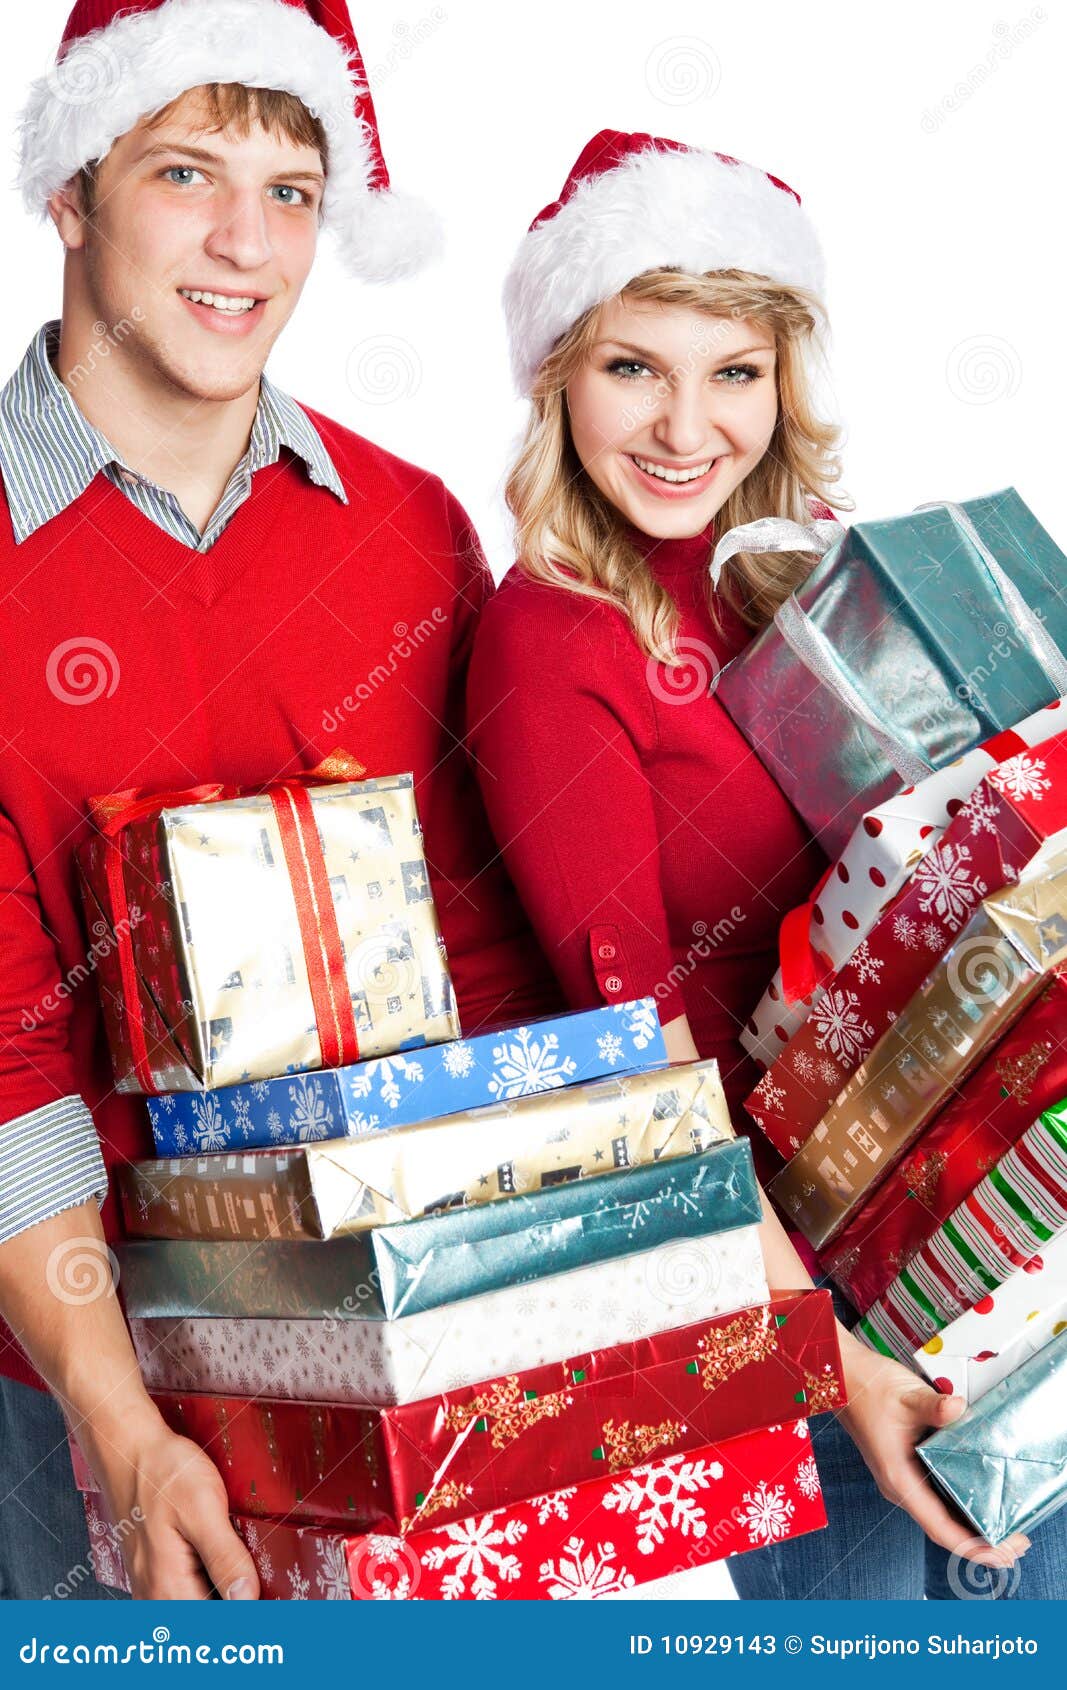 Christmas Shopping Couple Carrying Gifts Stock Image ...